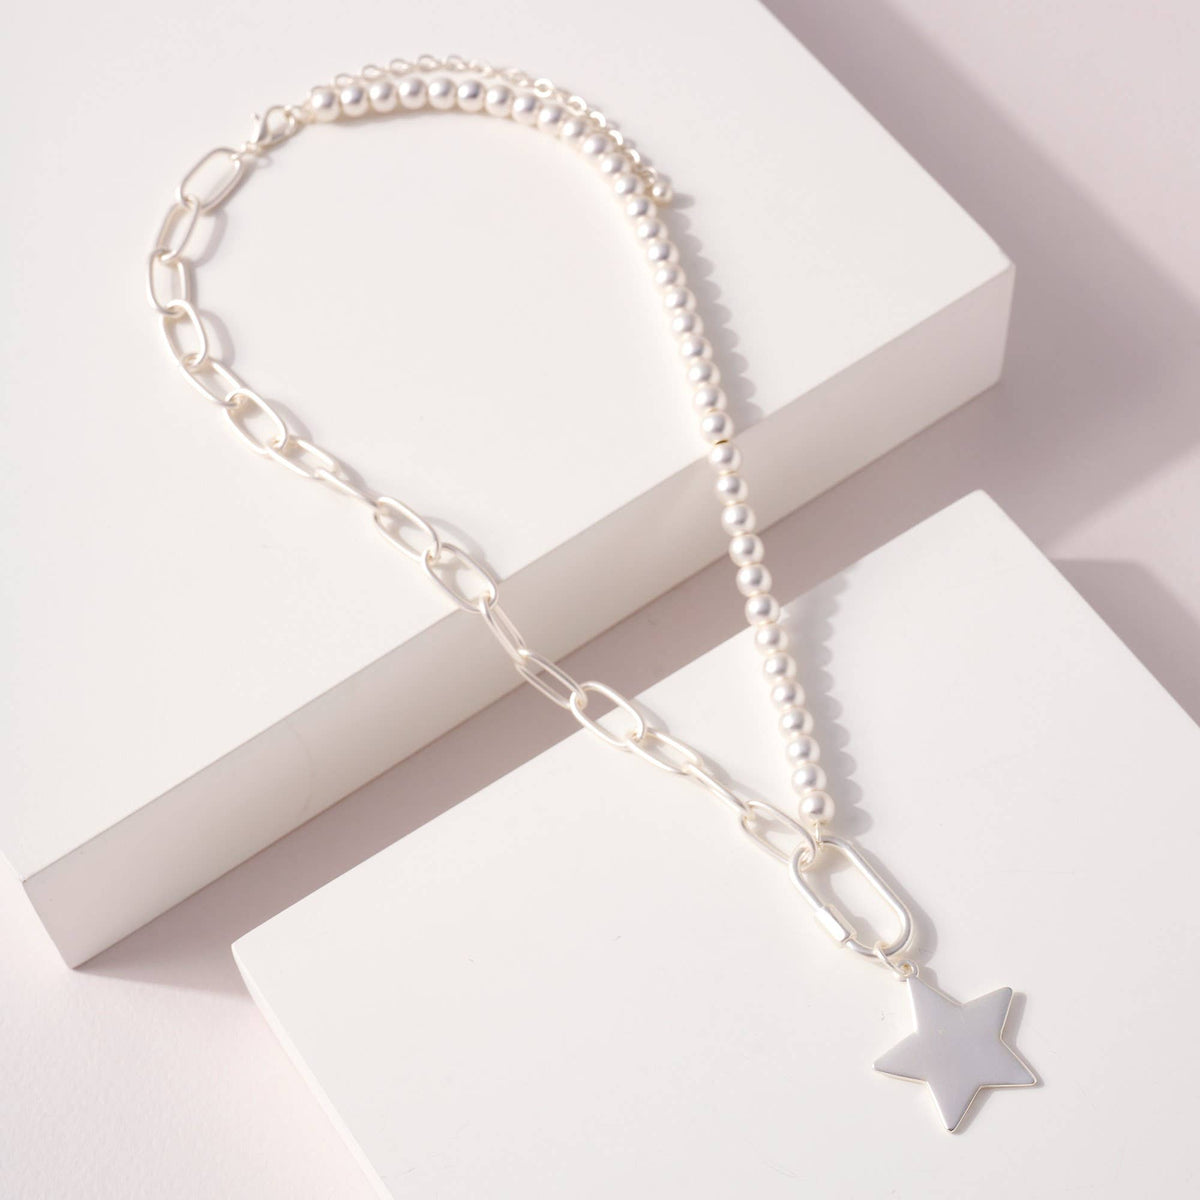 Star Charm Chain Linked Short Necklace